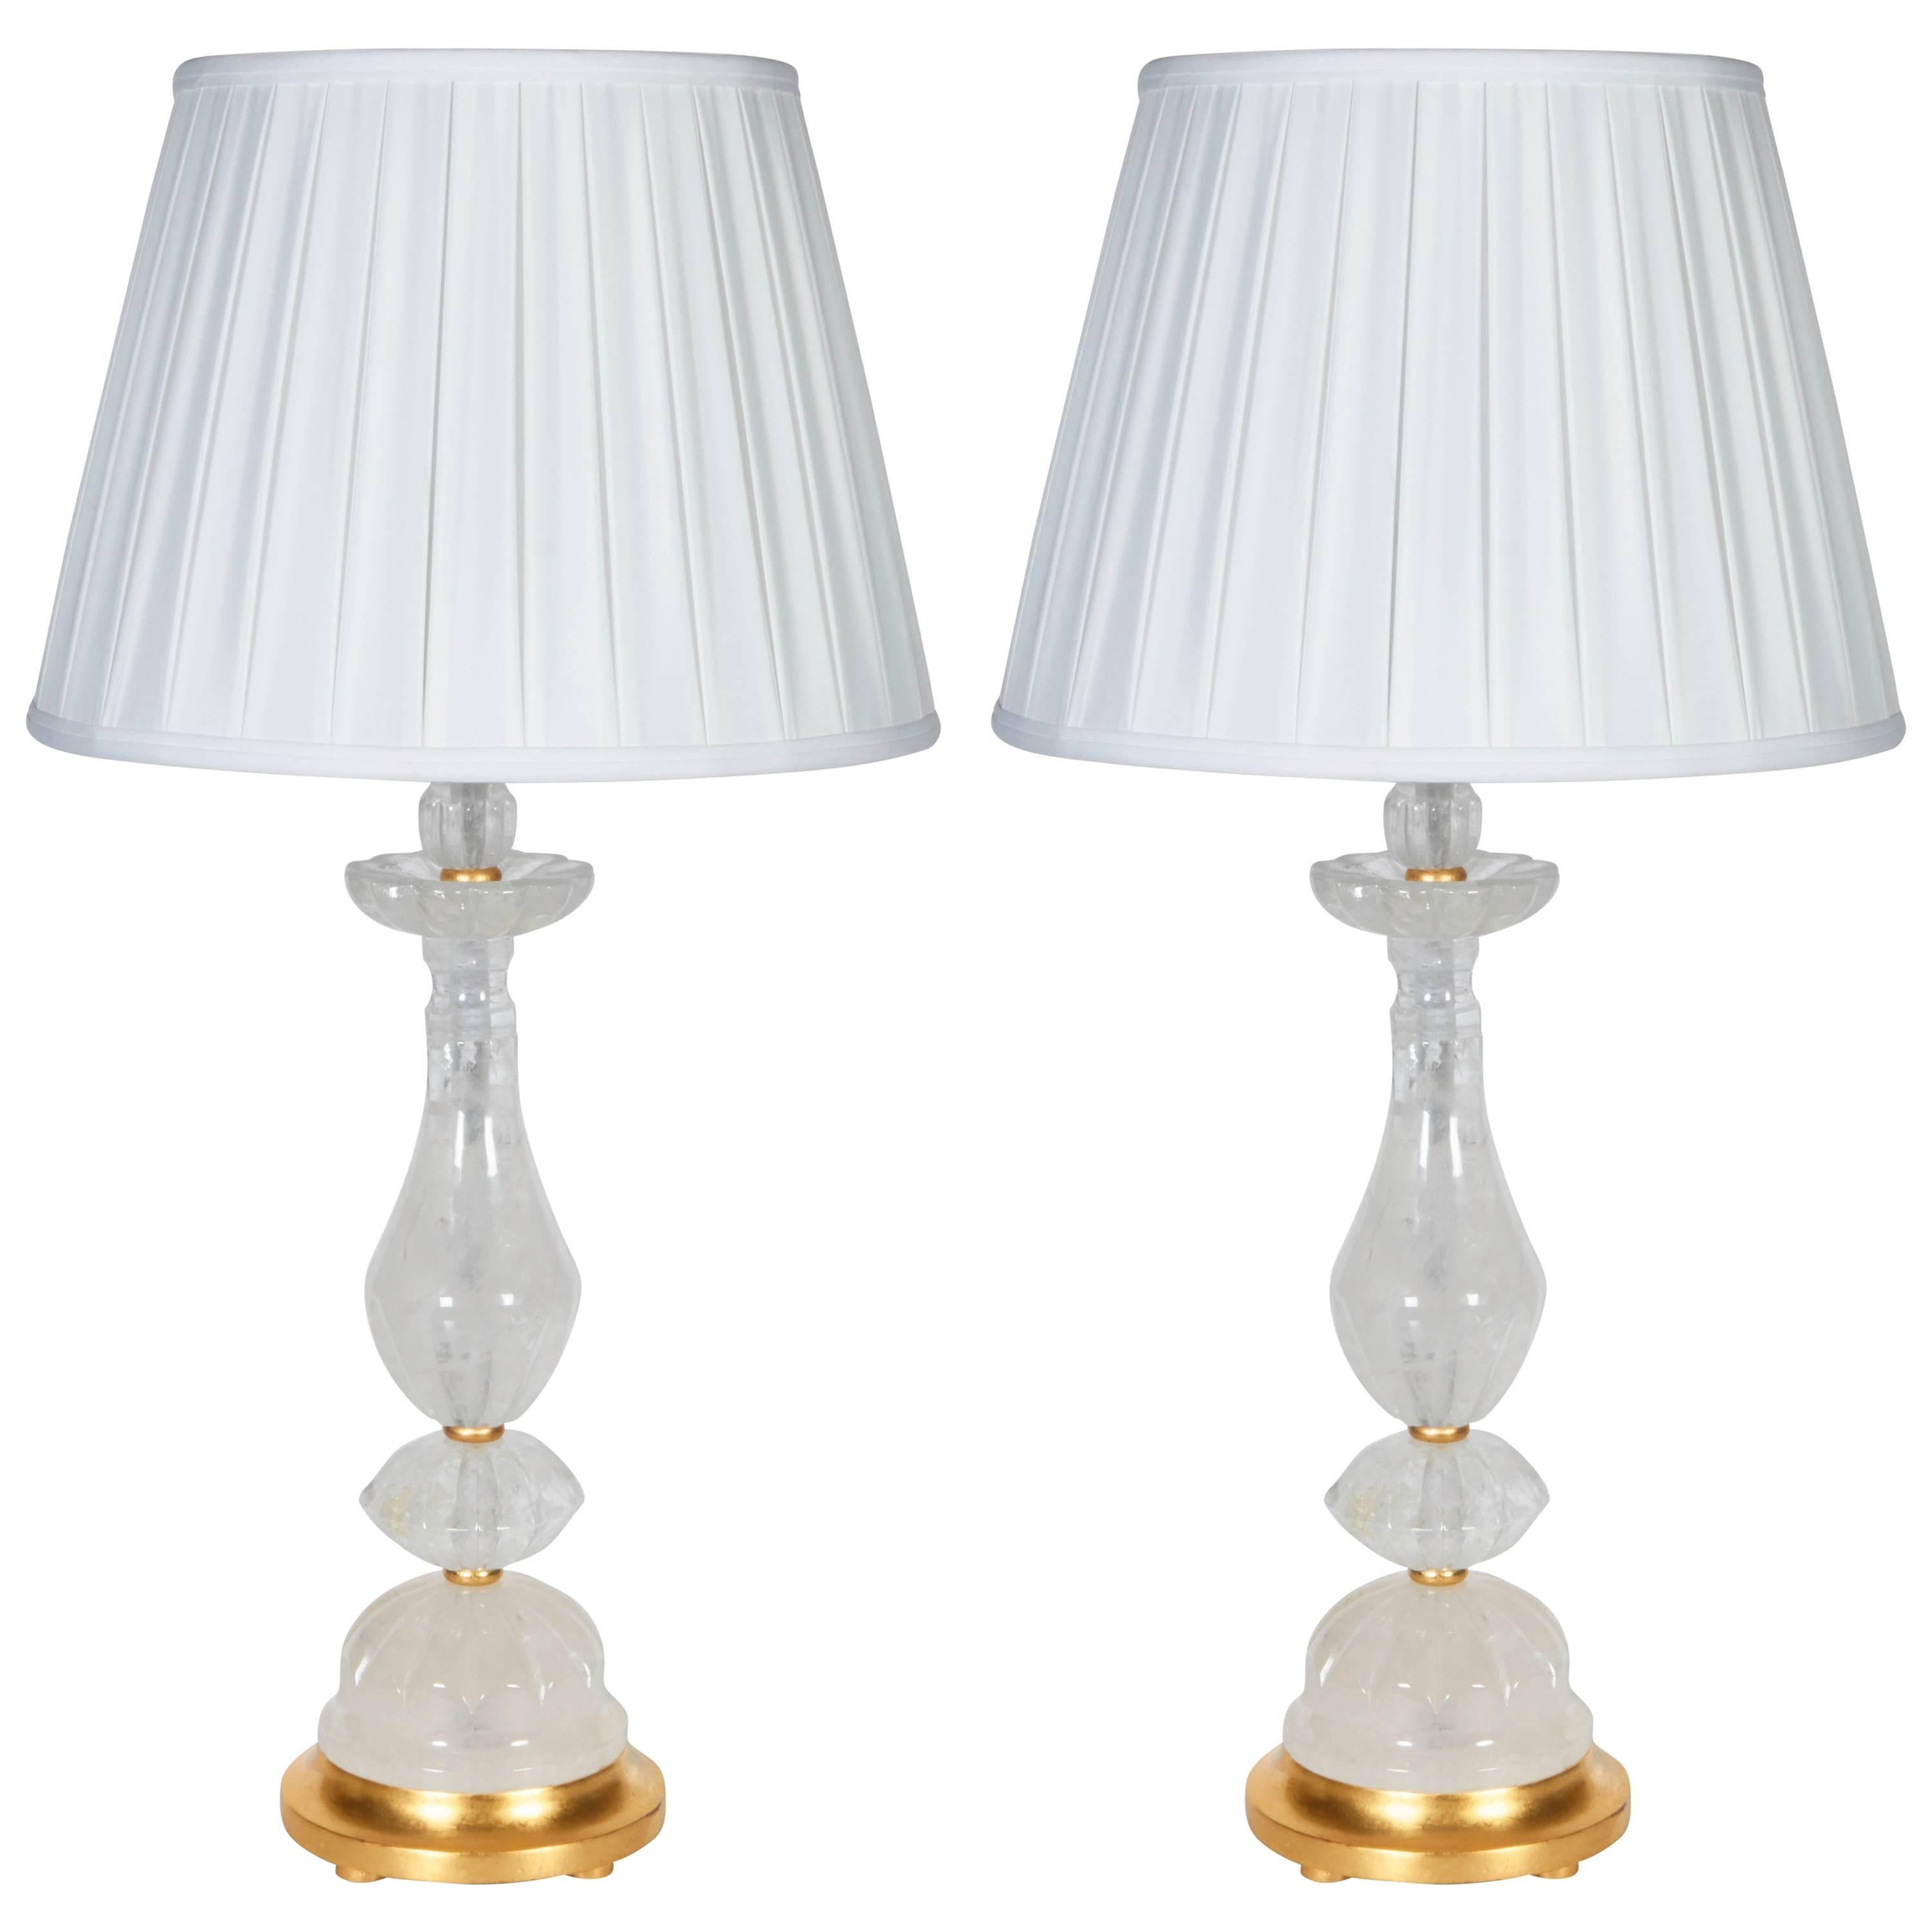 A Pair of New Rock Crystal Lamps